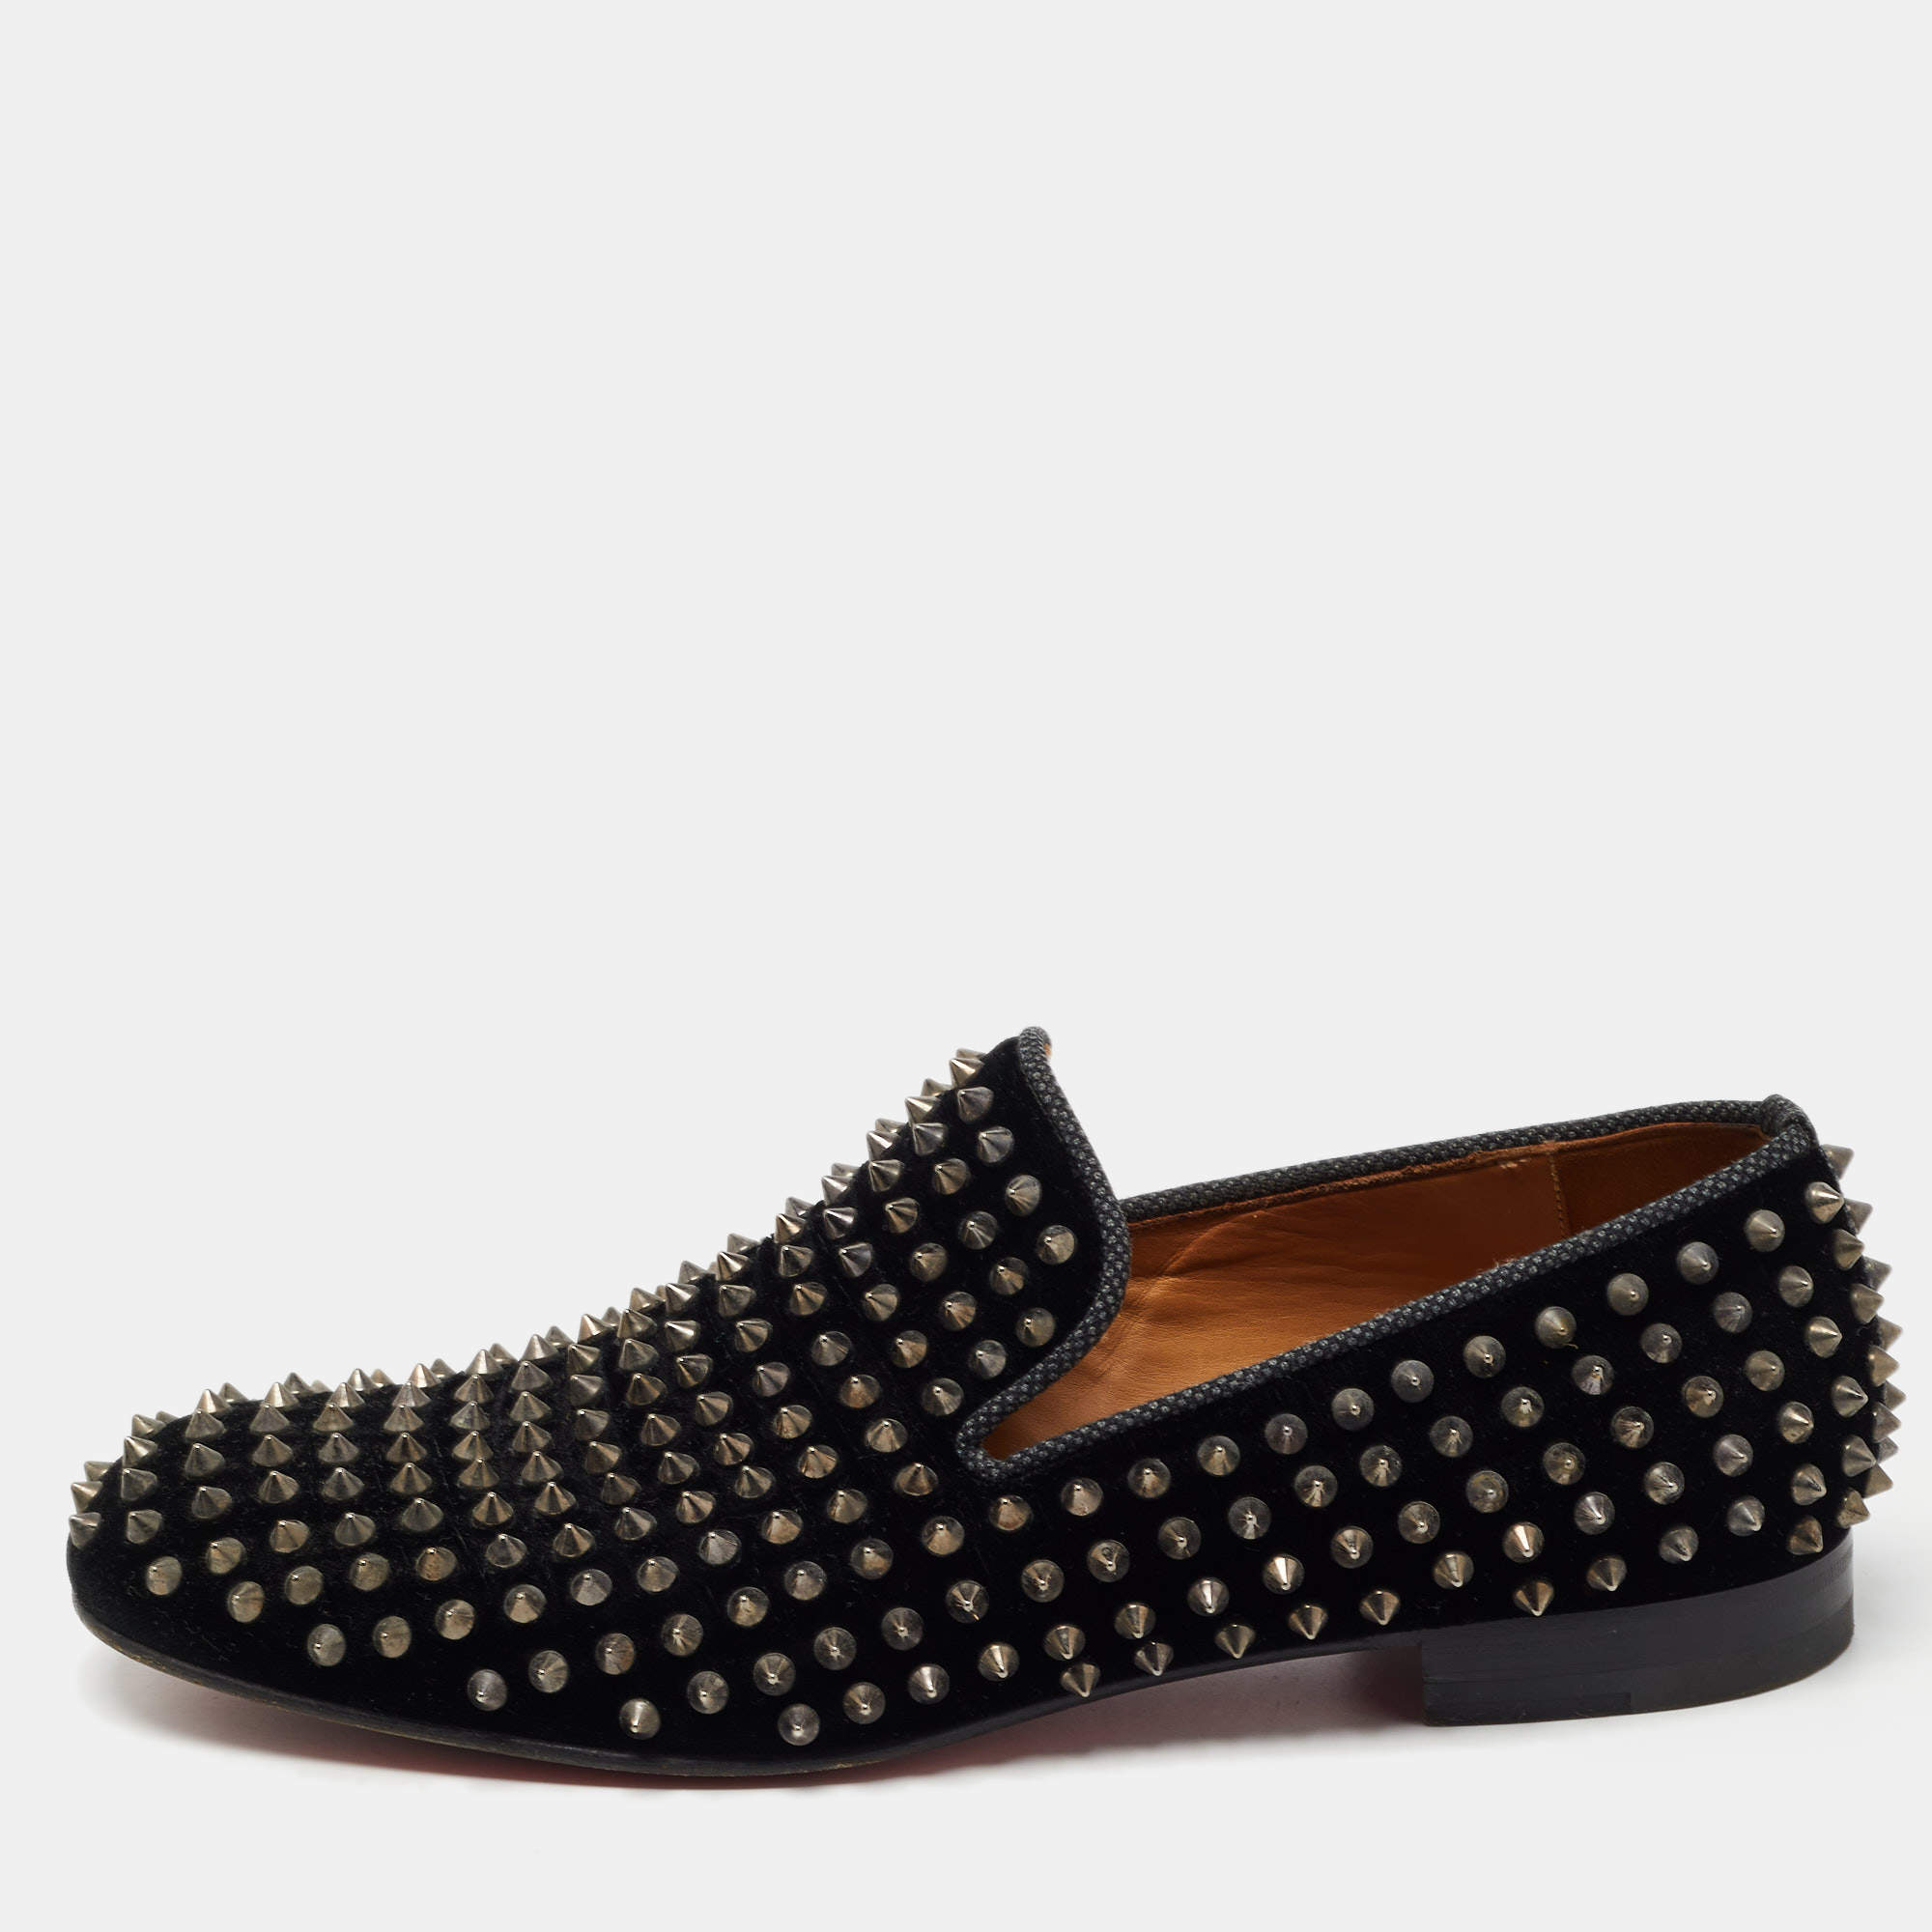 Christian Louboutin Black Leather Rollerboy Spiked Loafers, 53% OFF